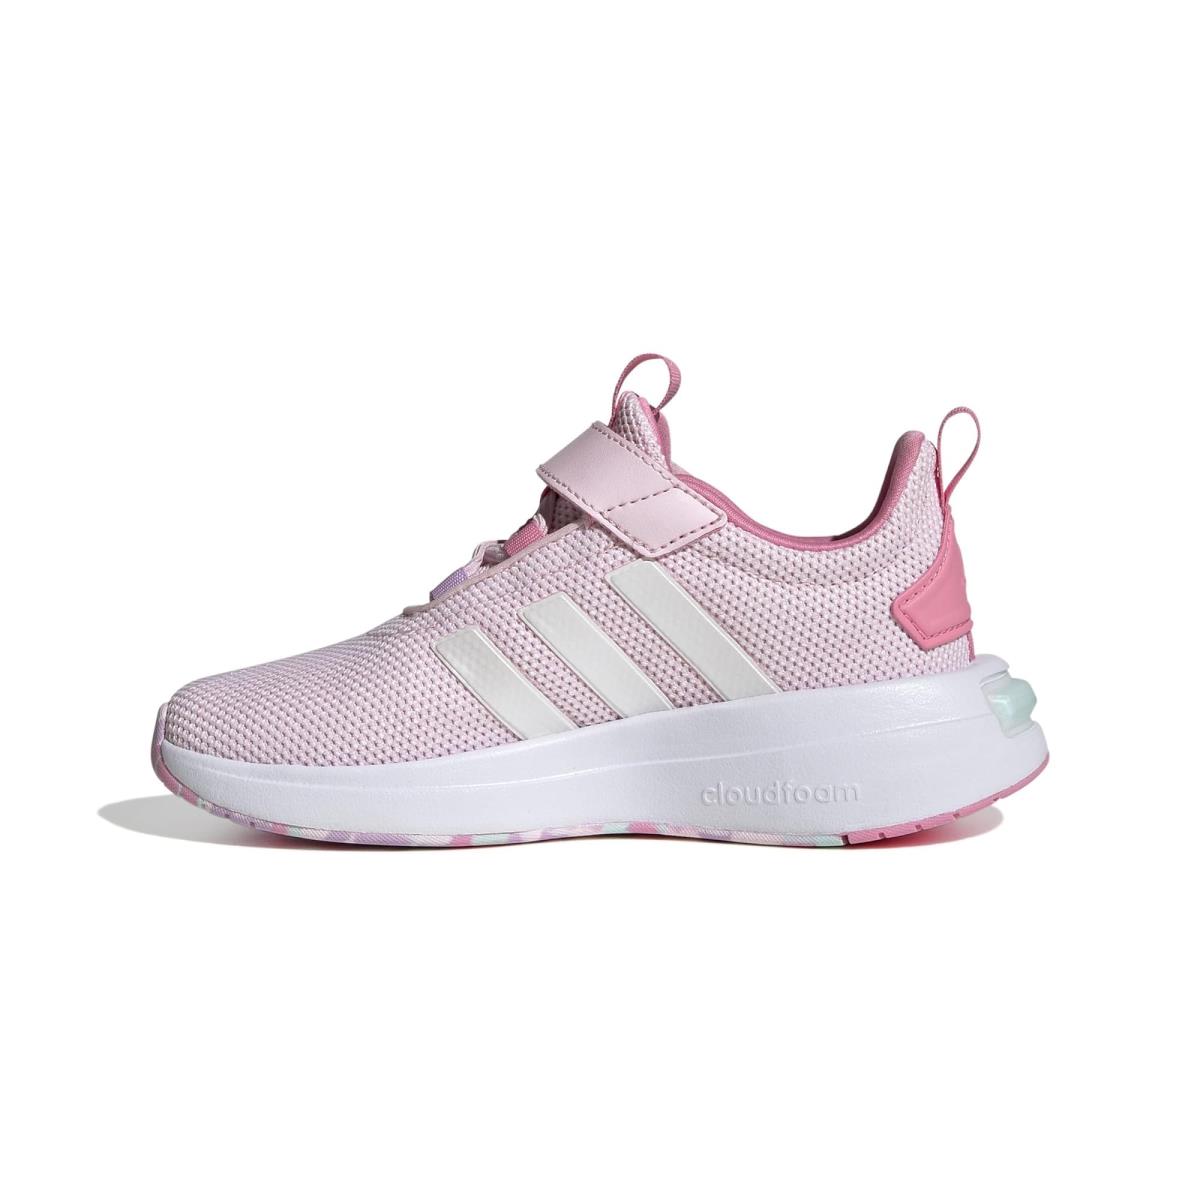 Adidas Unisex-child Racer Tr23 Shoes Sneaker Clear Pink/Zero Metallic/Bliss Pink